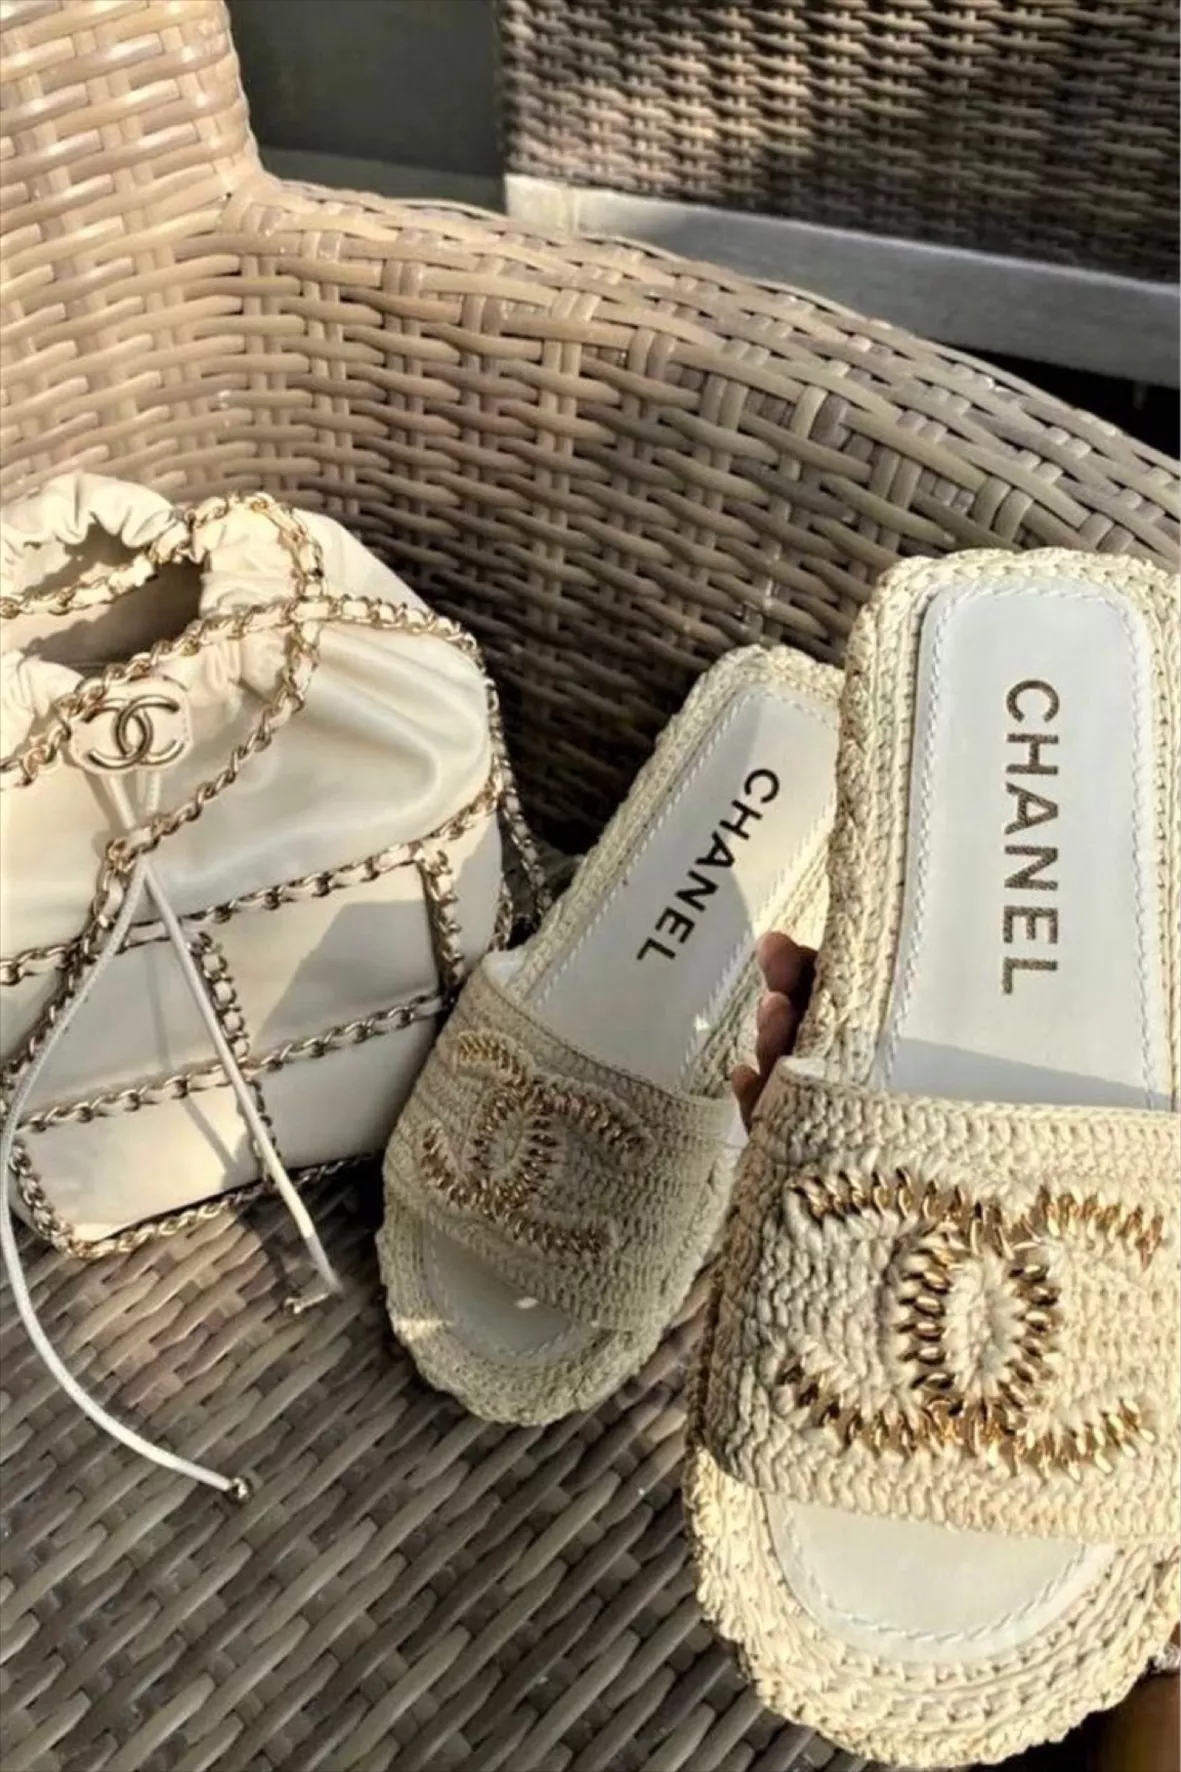 YSL ESPADRILLE UNBOXING & REVIEW 